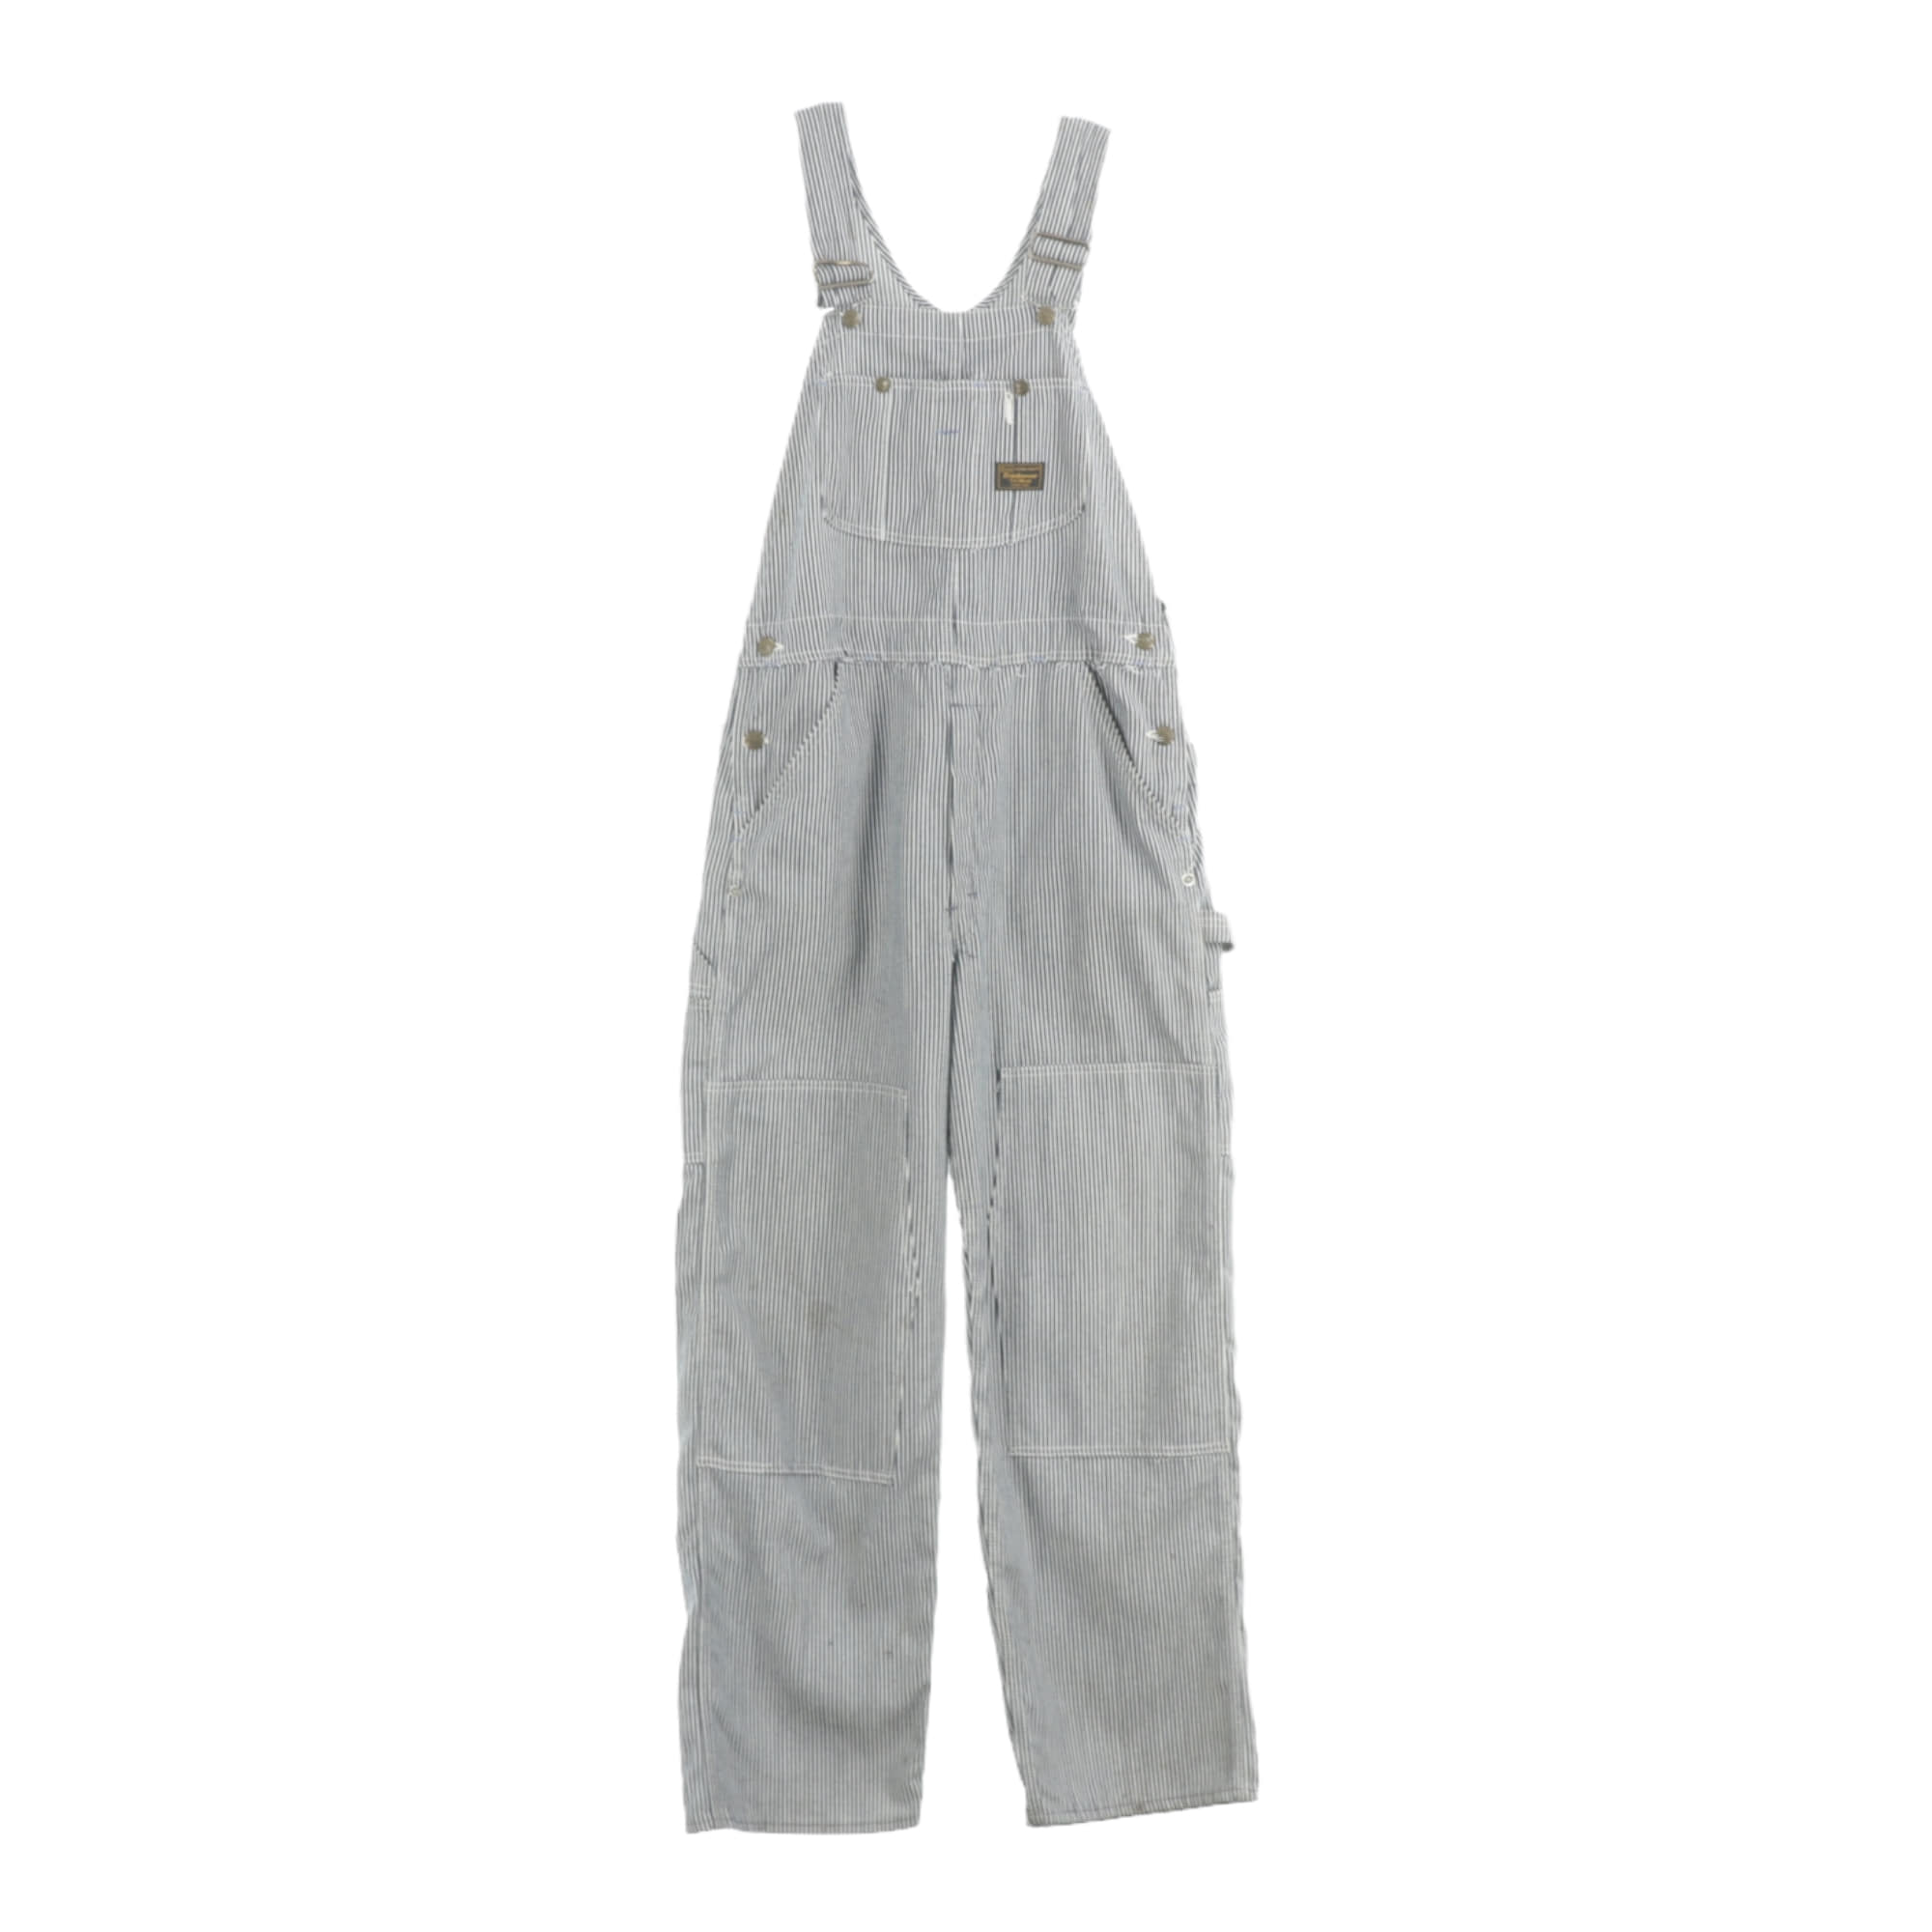 Sears,Overall/Jumpsuit